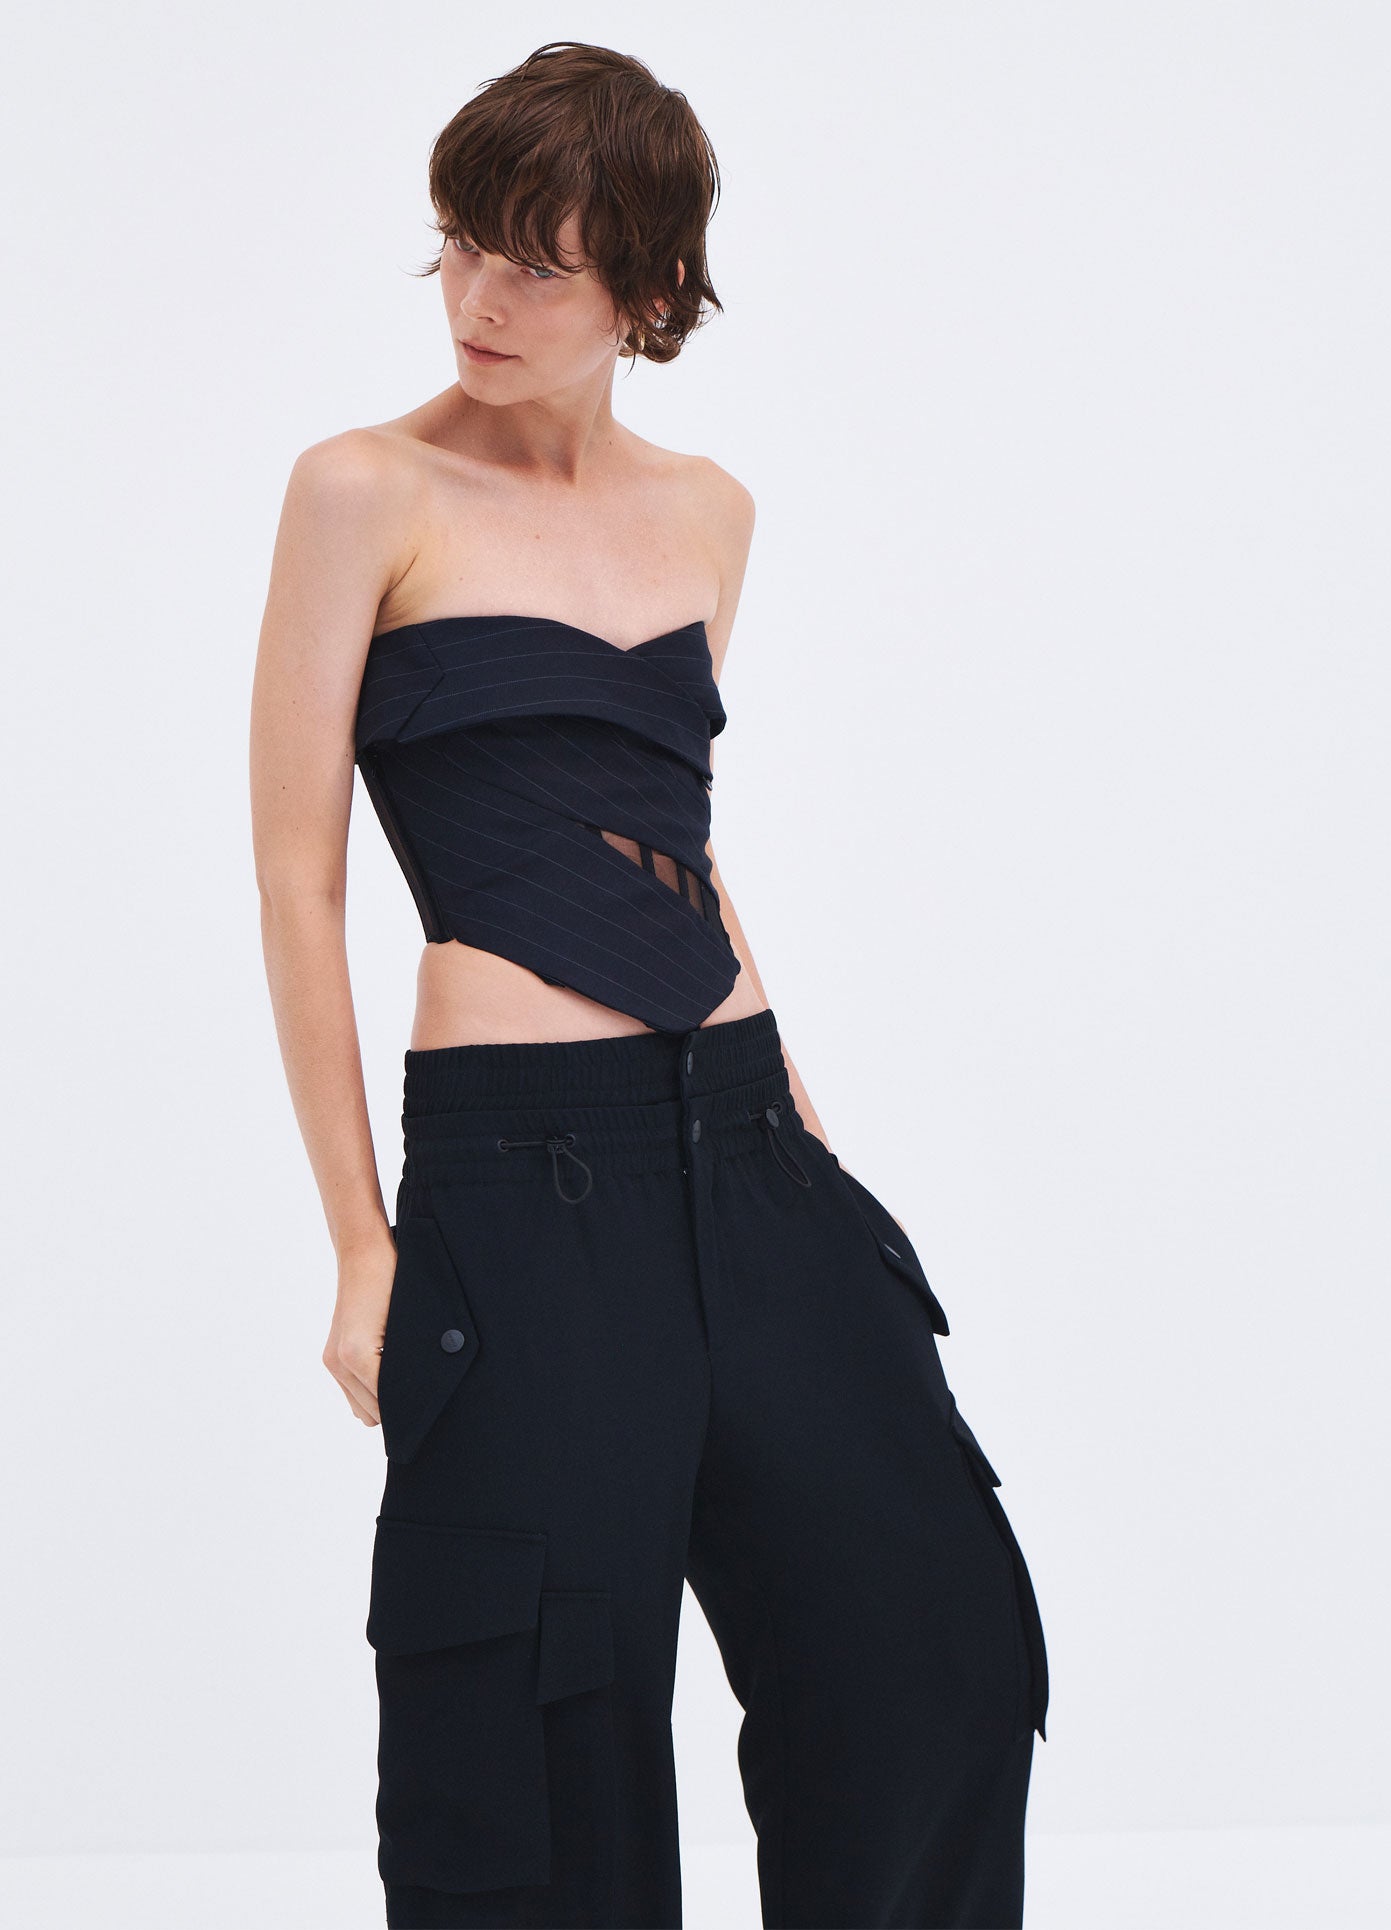 Cargo Parachute Pants by Monse for $99